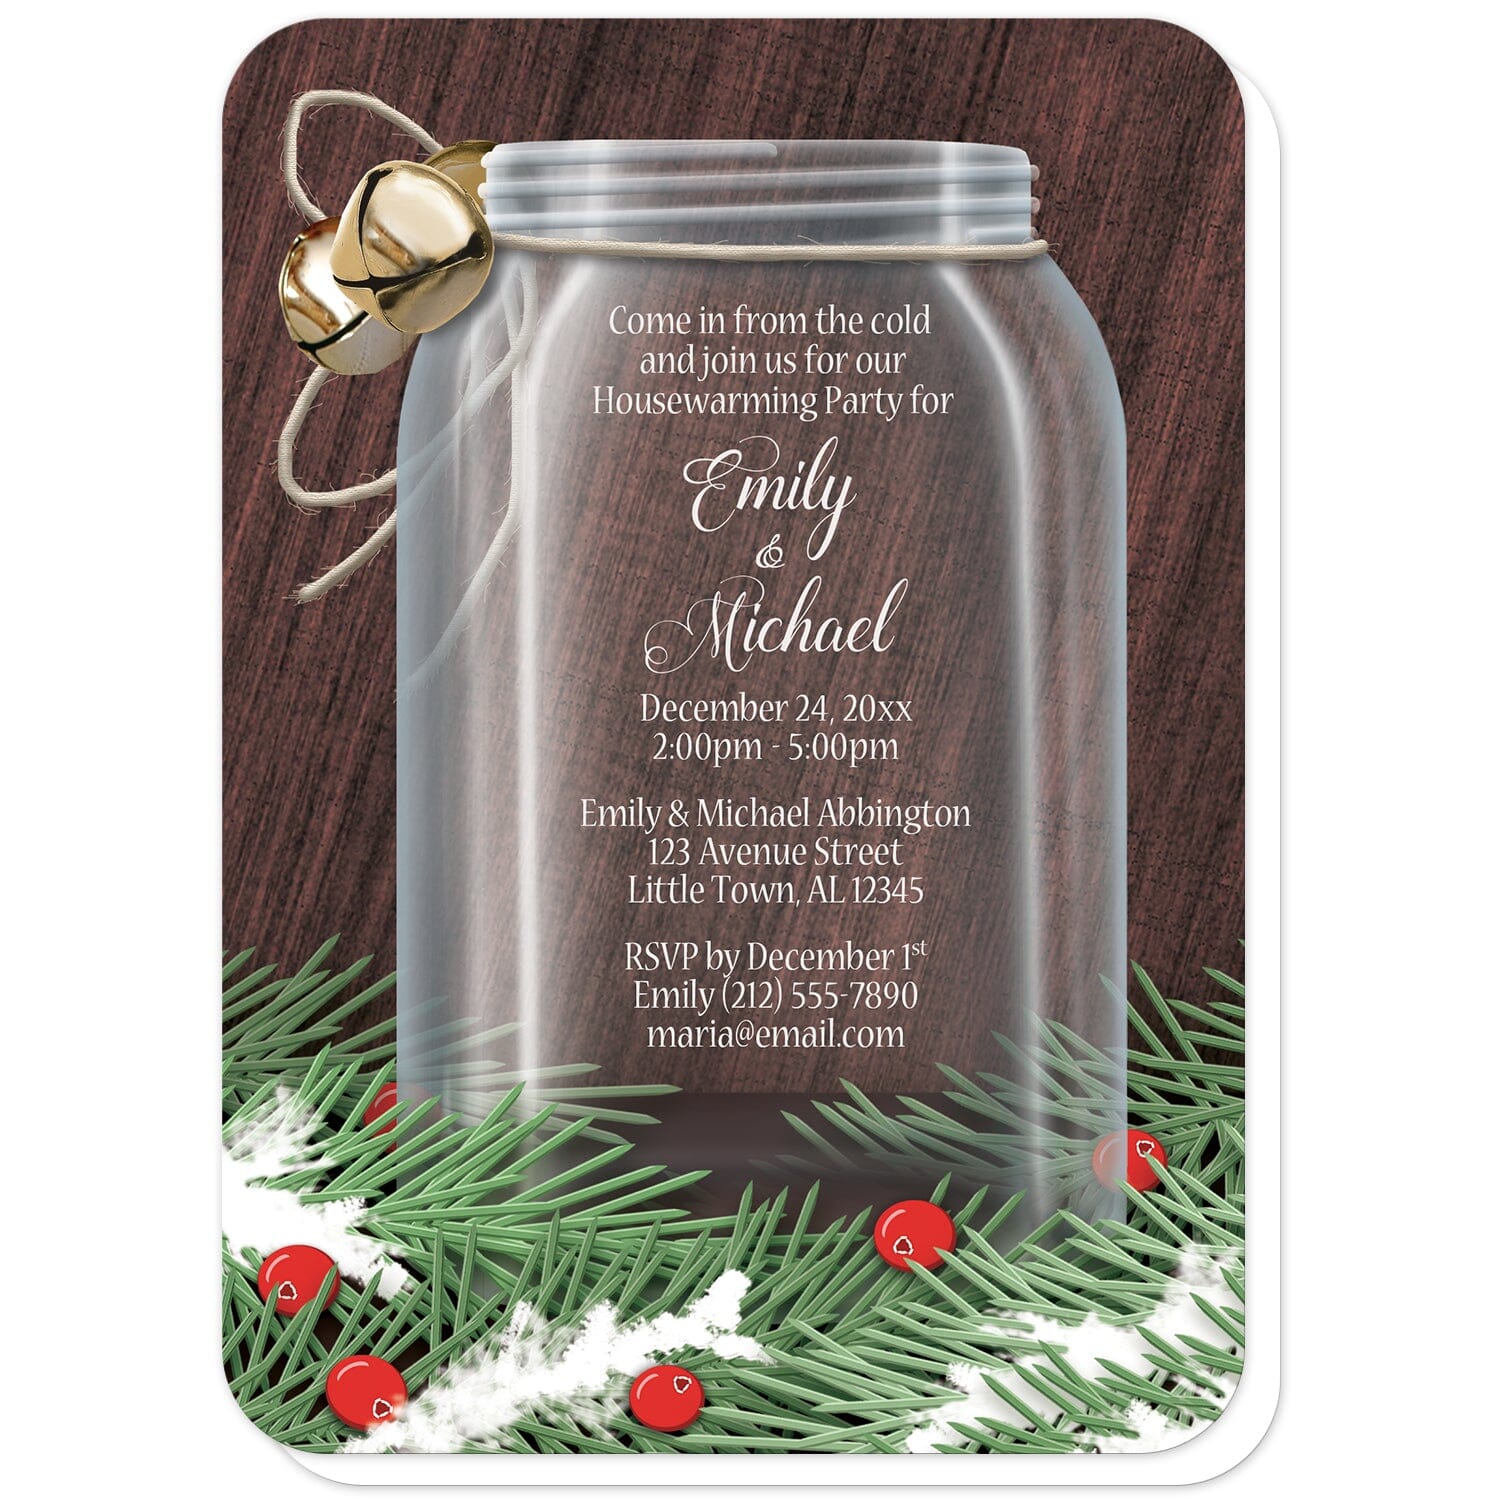 Winter Mason Jar Pine Boughs Housewarming Invitations (with rounded corners) at Artistically Invited. Rustic holiday-themed winter mason jar pine boughs housewarming invitations designed with a glass mason jar illustration with twine and jingle bells tied around the top of the jar and pine boughs and cranberries along the bottom over a dark wood design. Your personalized housewarming celebration details are custom printed in white over the mason jar area of the design.